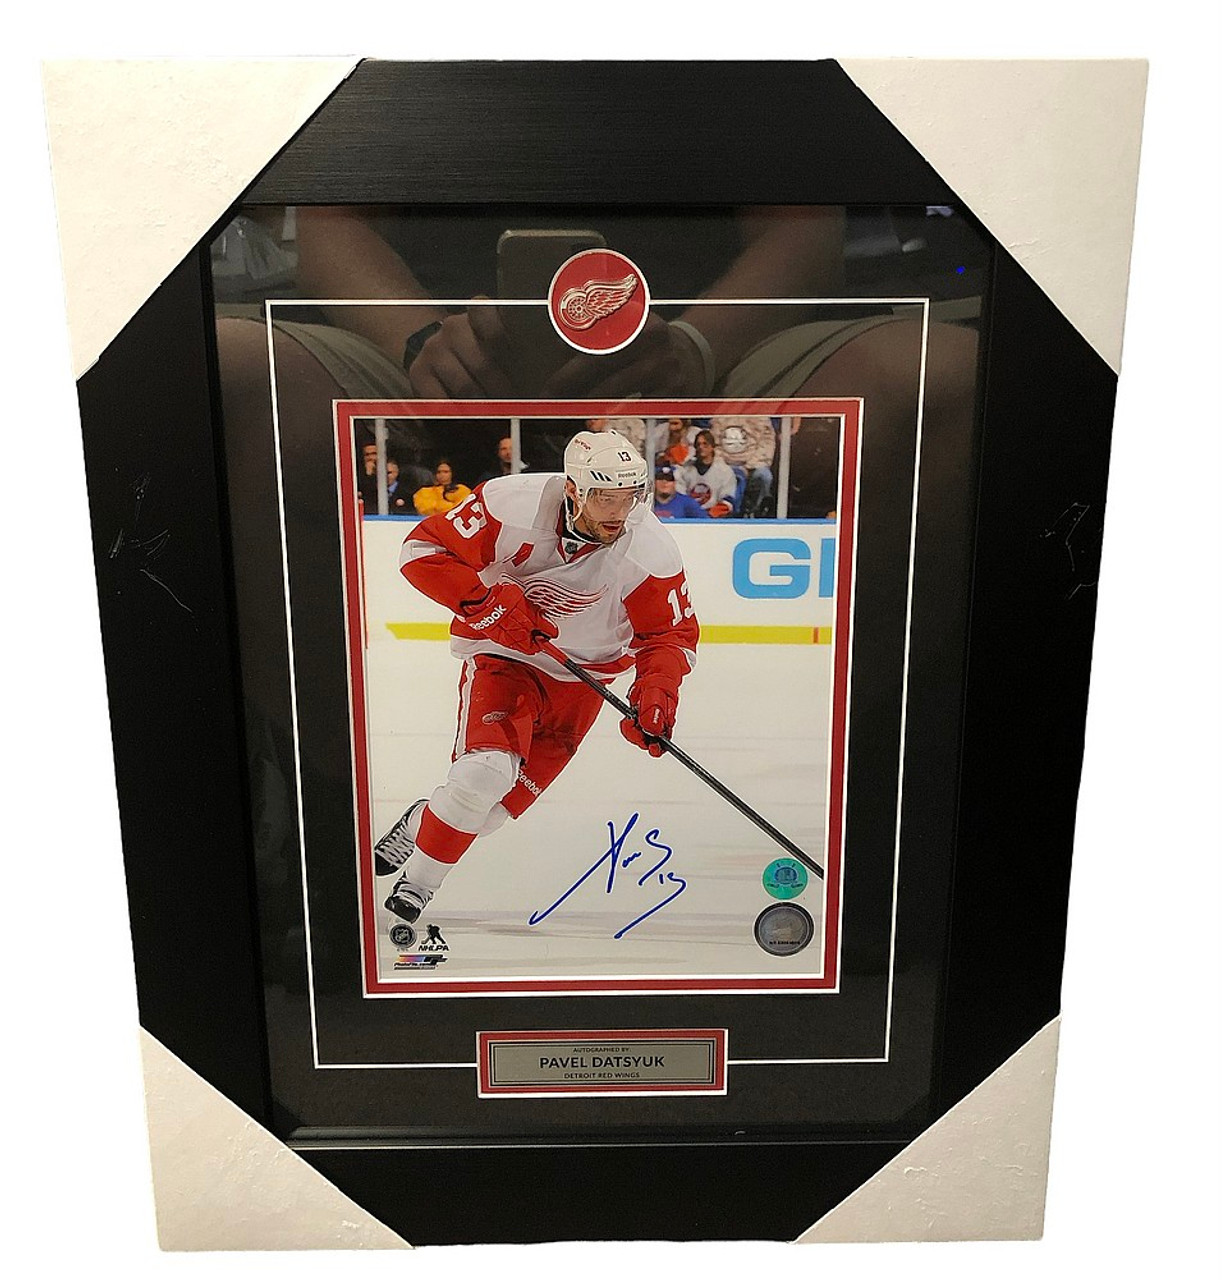 Dominik Hasek Autographed Signed Framed Detroit Red Wings 